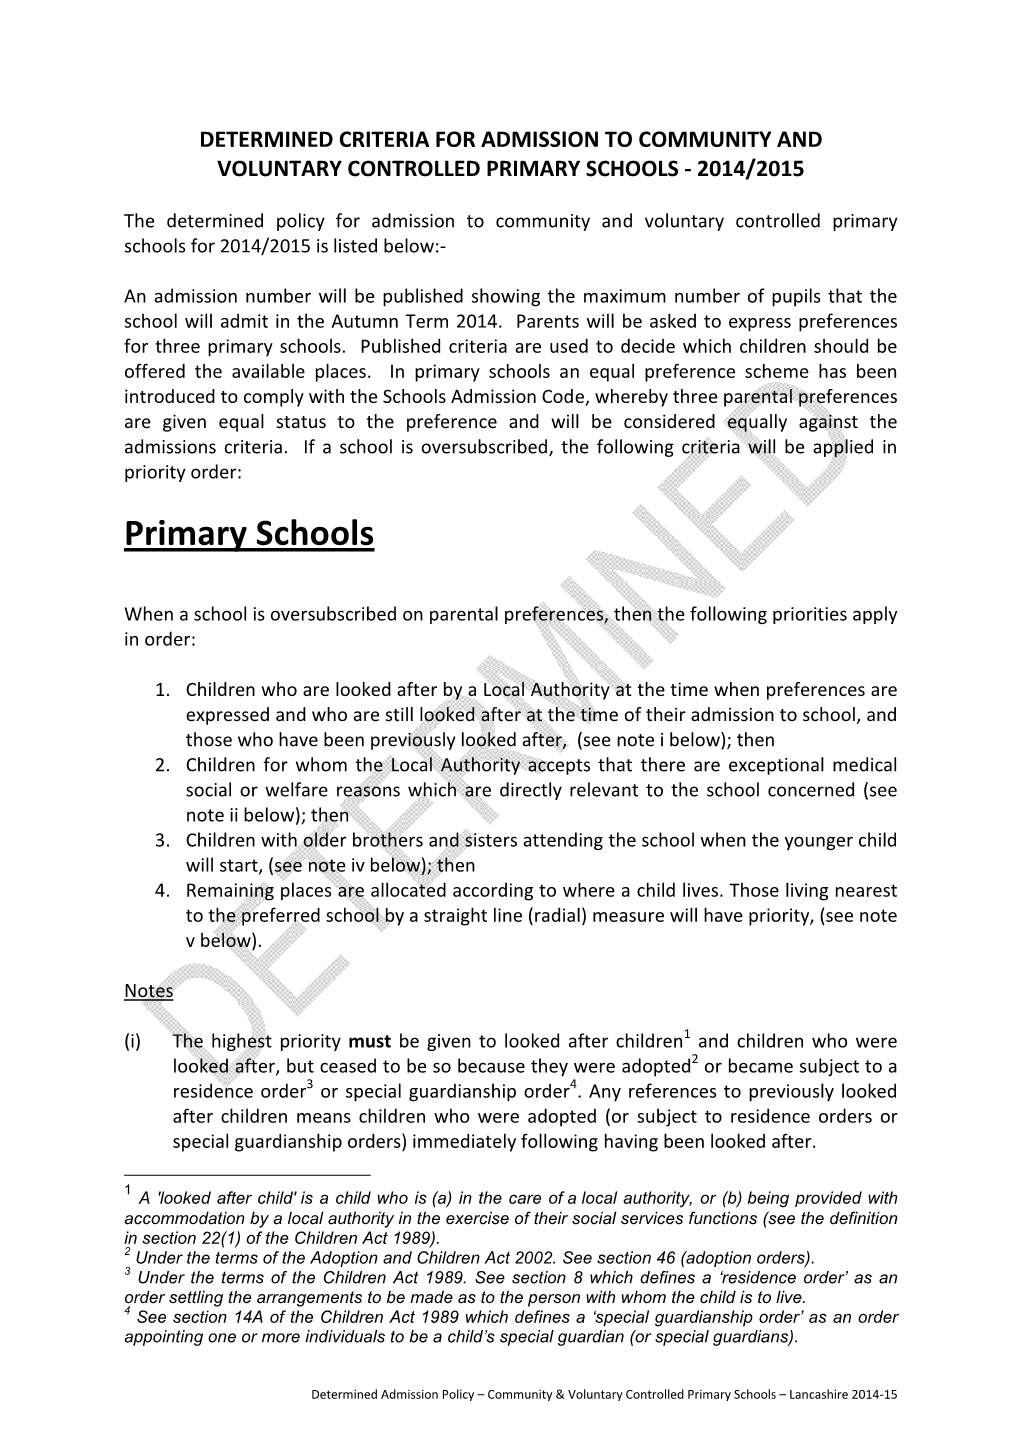 Determined Admission Policy Primaryc & VC 2014-15